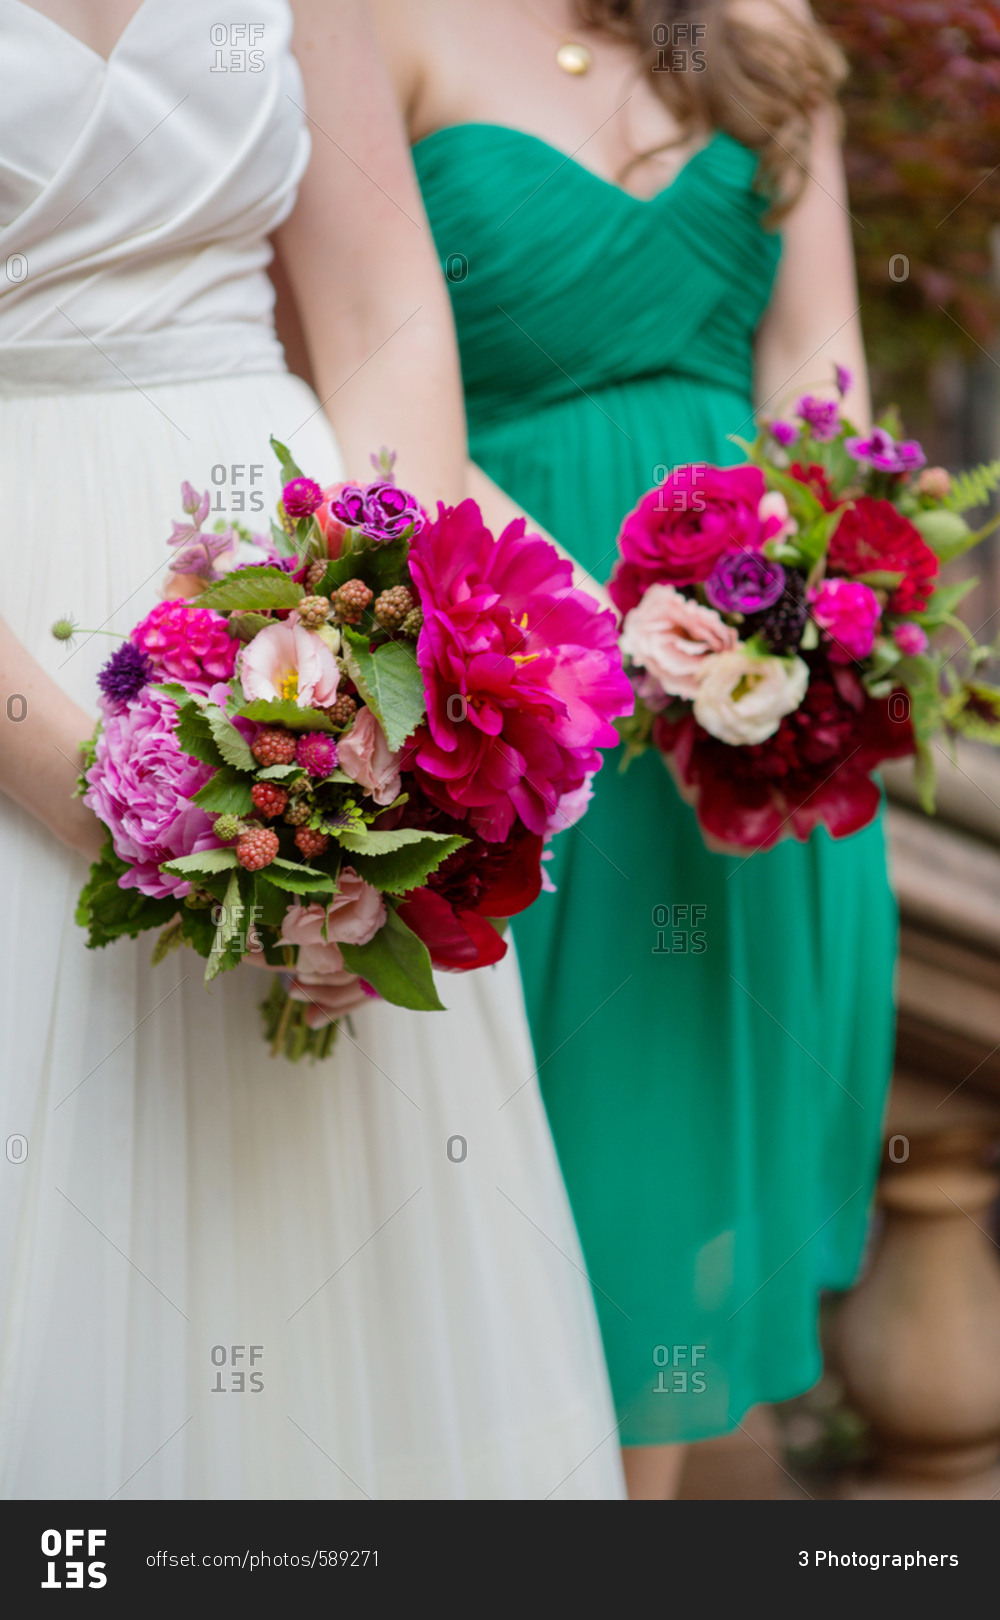 Bride and bridesmaid holding bouquets of pink and purple flowers